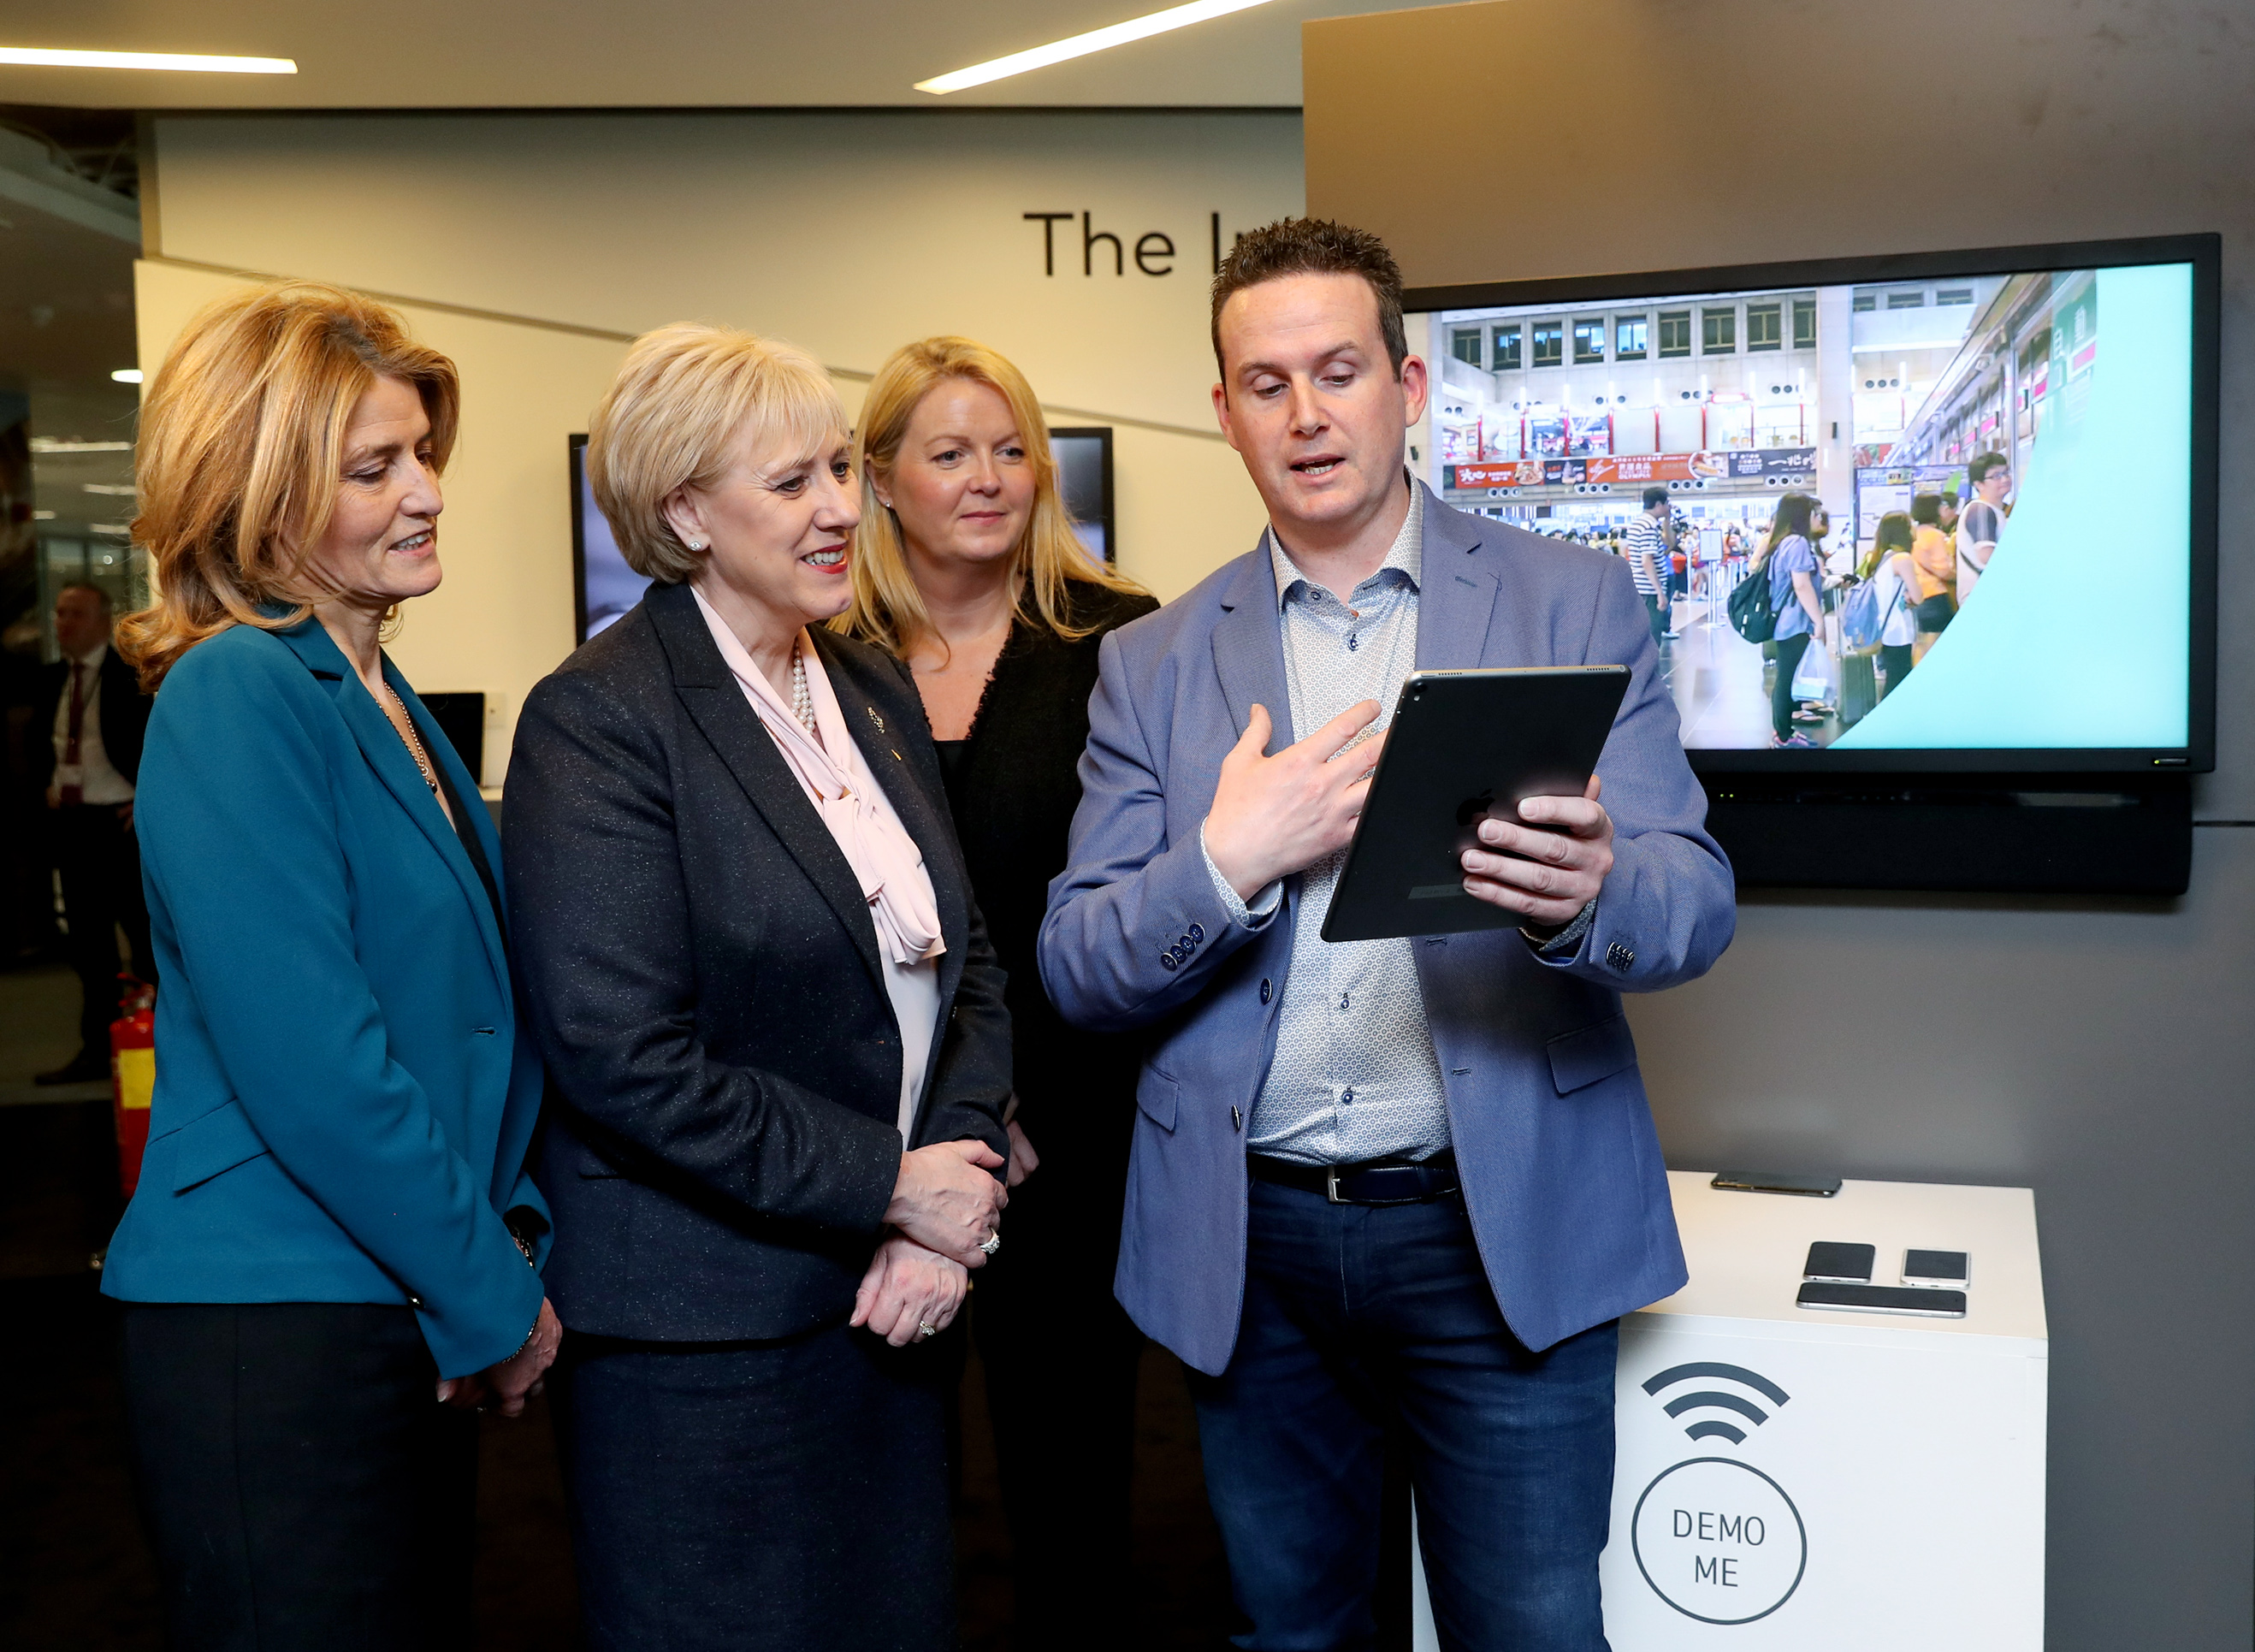 Embargoed until 00.01 Thursday 12th April 11/04/2018 NO REPRO FEE, MAXWELLS DUBLIN Mastercard expands presence in Ireland, hiring 175 new staff to drive payments innovation. Pic shows ( l to r ) Mary Buckley, Executive Director, IDA Ireland, Minister for Business, Enterprise and Innovation, Ms. Heather Humphreys T.D., Sonya Geelon, Country Manager, Mastercard Ireland and Dave Fleming, Global Head of Research & Development, MasterCard. Mastercard has announced it will expand its presence in Ireland, hiring 175 new employees in Dublin focused on driving innovation and creating the future of payments around the world. Roles include software engineers, blockchain specialists, data scientists, project managers, analysts, product designers, cloud infrastructure specialists and information security experts. The new jobs represent Mastercard’s commitment to driving innovation in payments and beyond, designing ground-breaking security solutions, and striving for a world beyond cash. The office is also the hub of Mastercard’s business in Ireland, working with banks and credit card issuers to deliver convenient, safe and secure payment services to consumers and businesses across Ireland.  PIC: NO FEE, MAXWELLPHOTOGRAPHY.IE